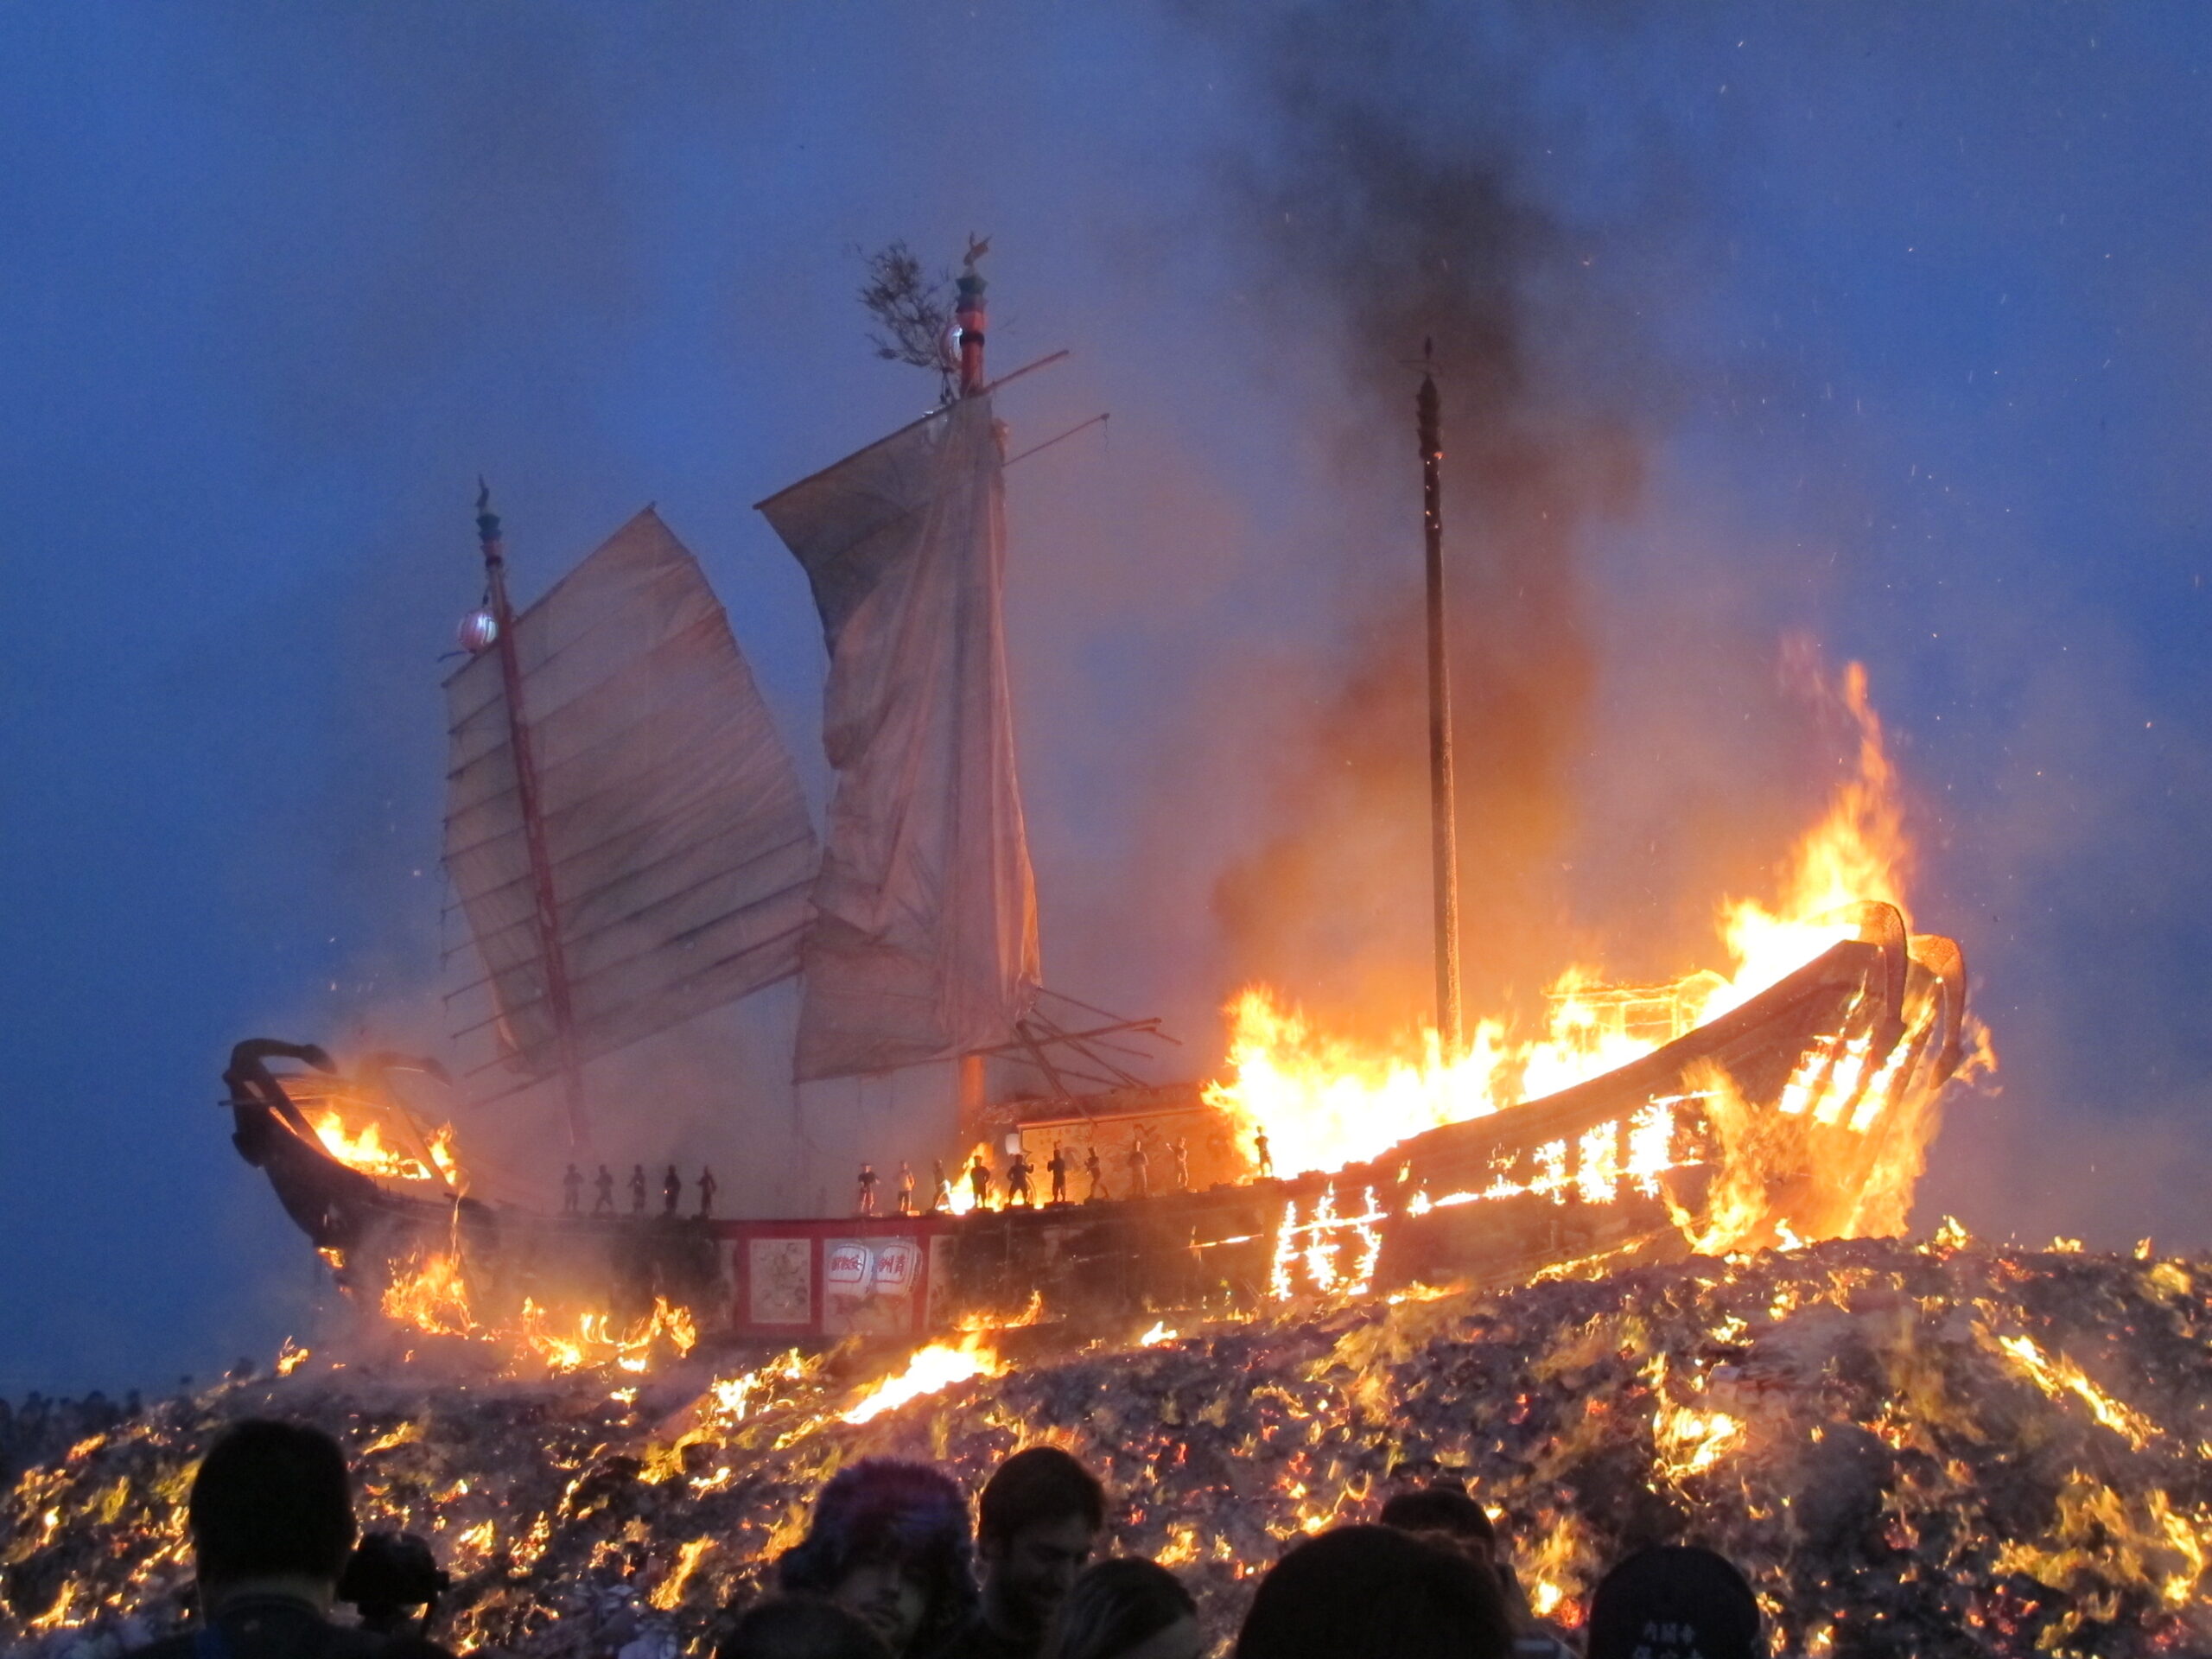 As dawn breaks, the boat is still aflame